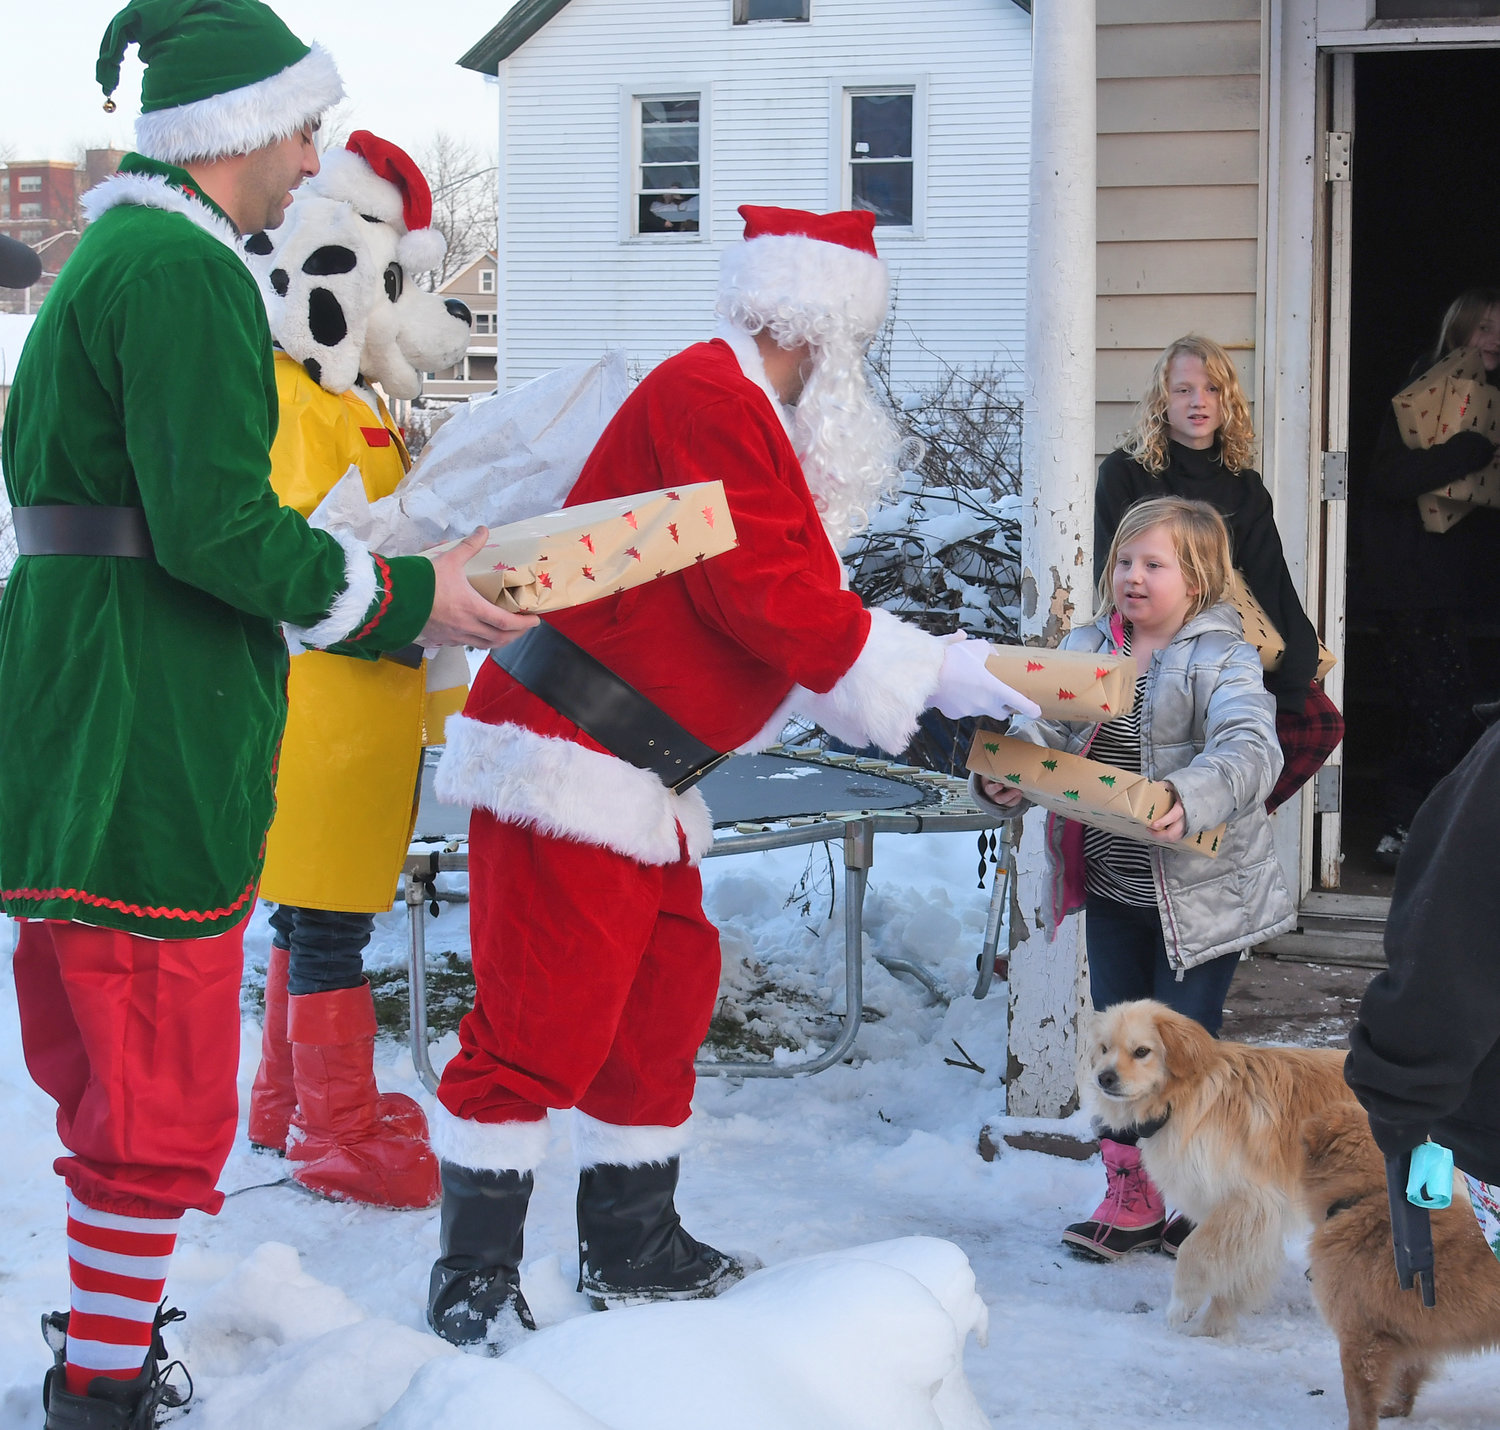 Santa Claus and one of his elves joined Sparky the Fire Dog to hand out presents to Taya Euson, age 9, and her brother, Matthew, age 13, at their home in Rome on Wednesday. The Rome Fire Department has been handing out gifts to underprivileged children in the city for years.